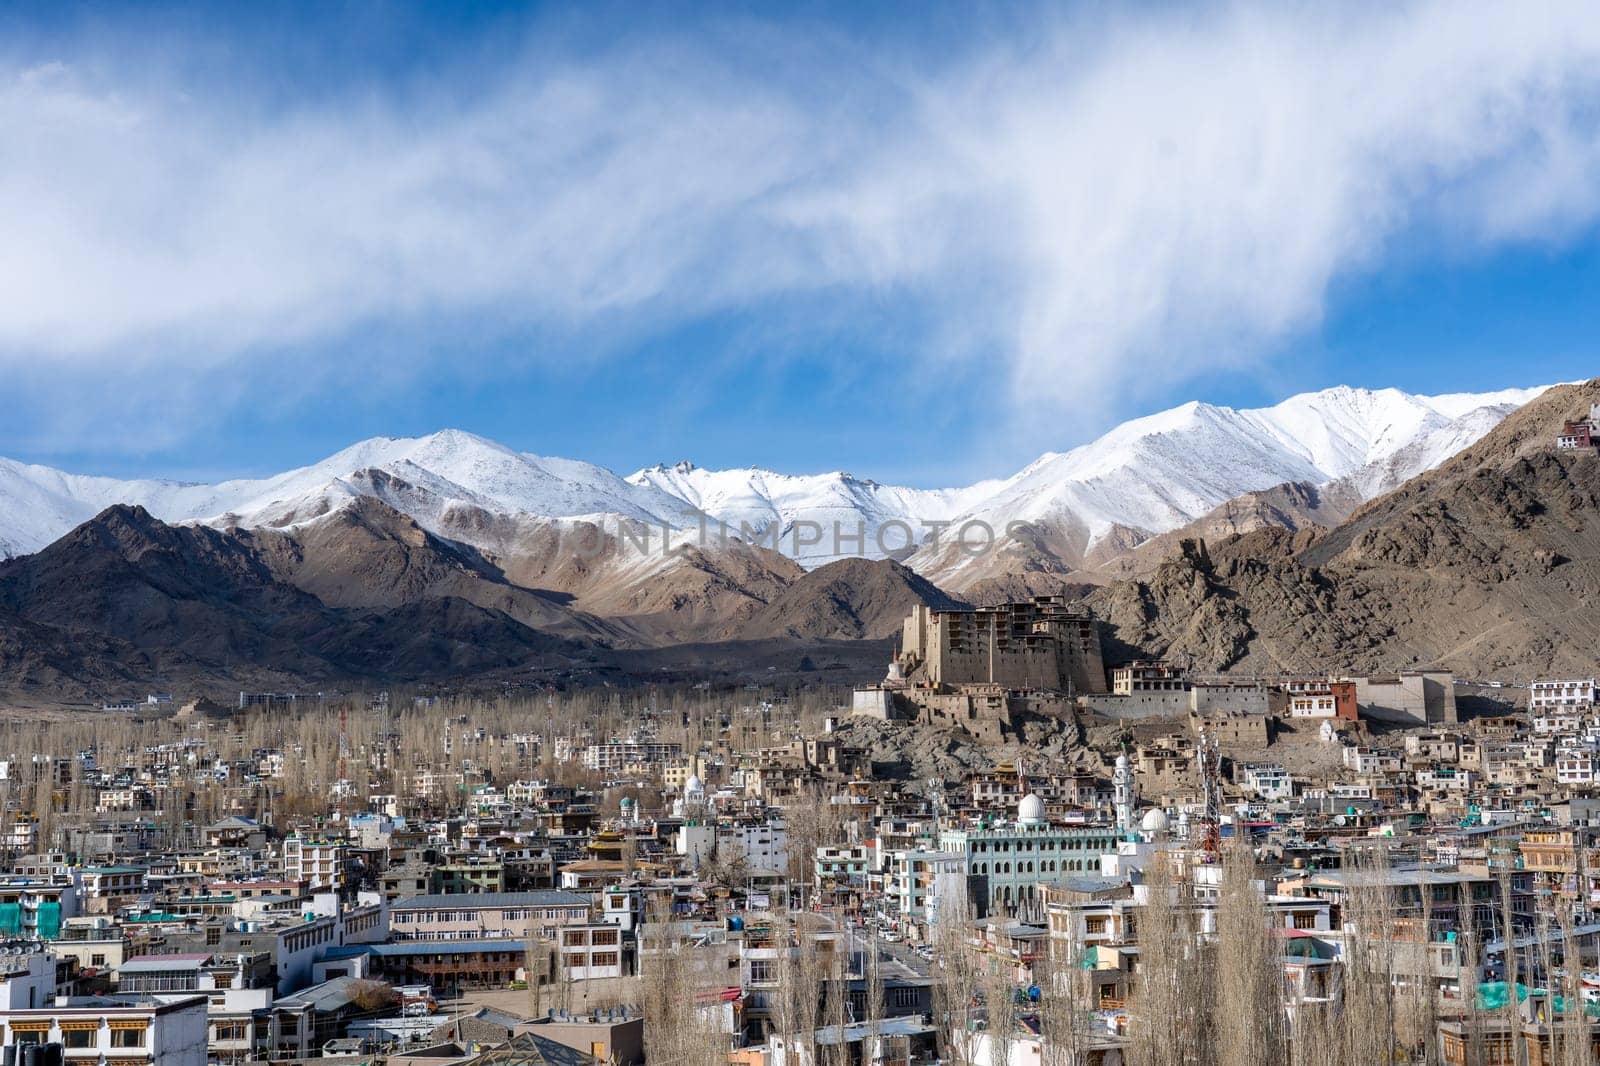 Leh, India - April 02, 2023: View of Leh Palace with snow capped mountains in the background